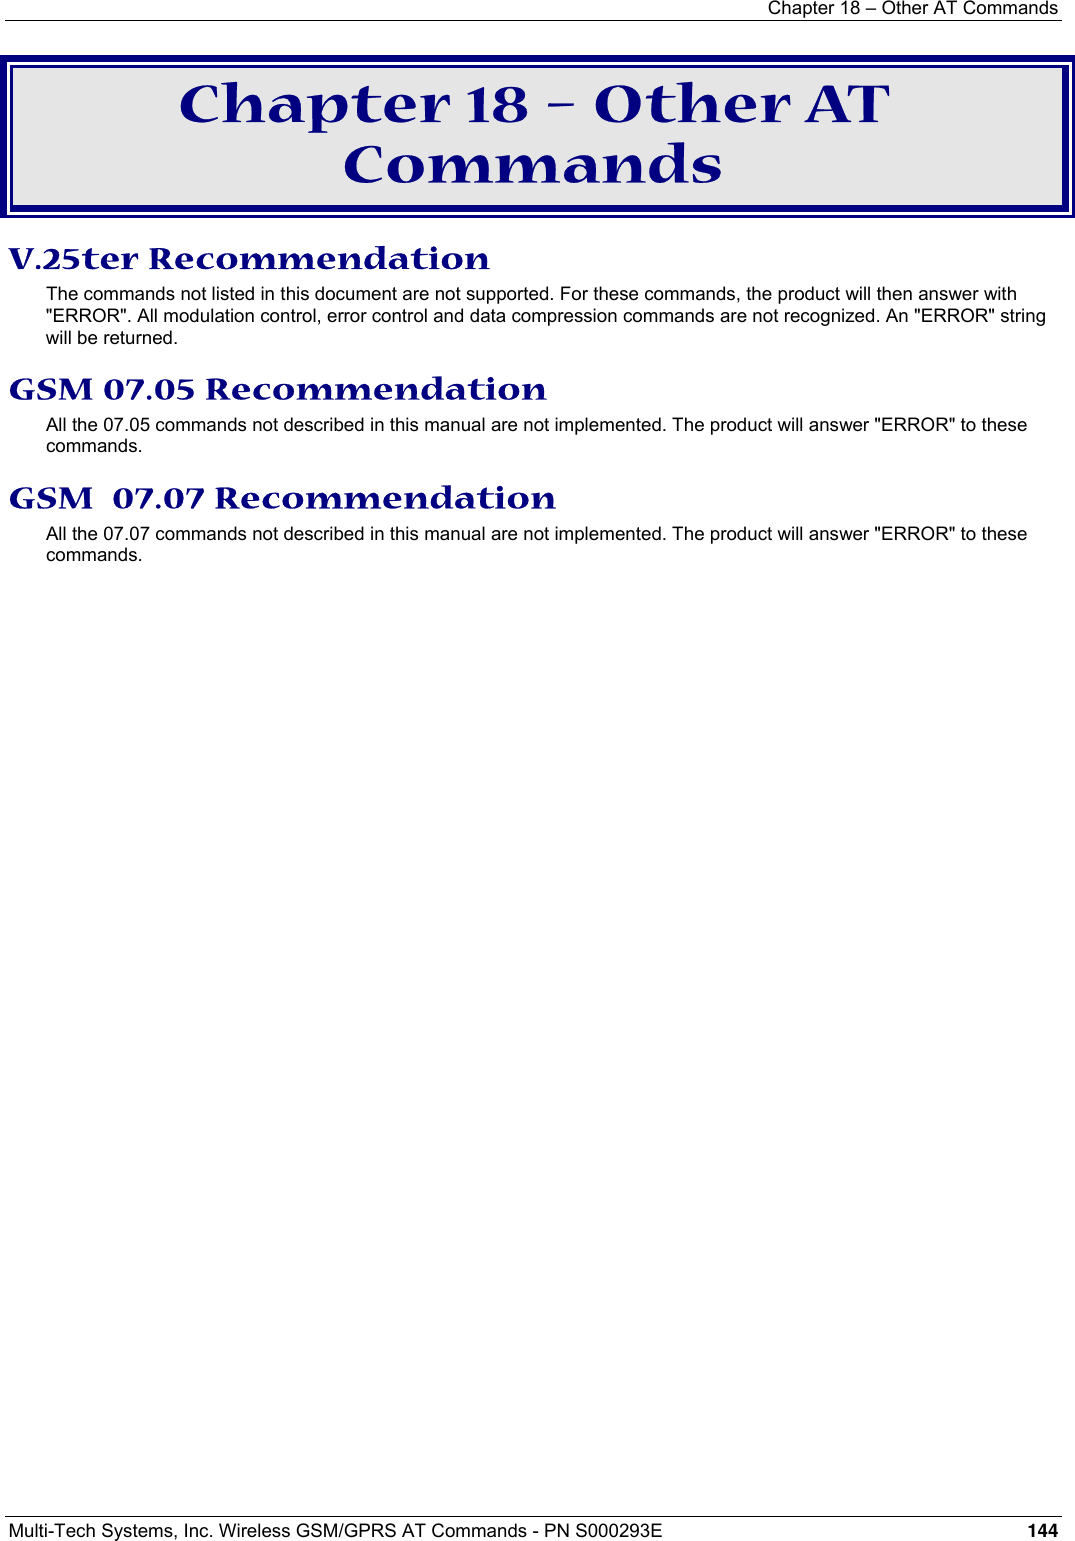 Chapter 18 – Other AT Commands  Multi-Tech Systems, Inc. Wireless GSM/GPRS AT Commands - PN S000293E 144  Chapter 18 – Other AT Commands V.25ter Recommendation The commands not listed in this document are not supported. For these commands, the product will then answer with &quot;ERROR&quot;. All modulation control, error control and data compression commands are not recognized. An &quot;ERROR&quot; string will be returned. GSM 07.05 Recommendation All the 07.05 commands not described in this manual are not implemented. The product will answer &quot;ERROR&quot; to these commands. GSM  07.07 Recommendation All the 07.07 commands not described in this manual are not implemented. The product will answer &quot;ERROR&quot; to these commands. 